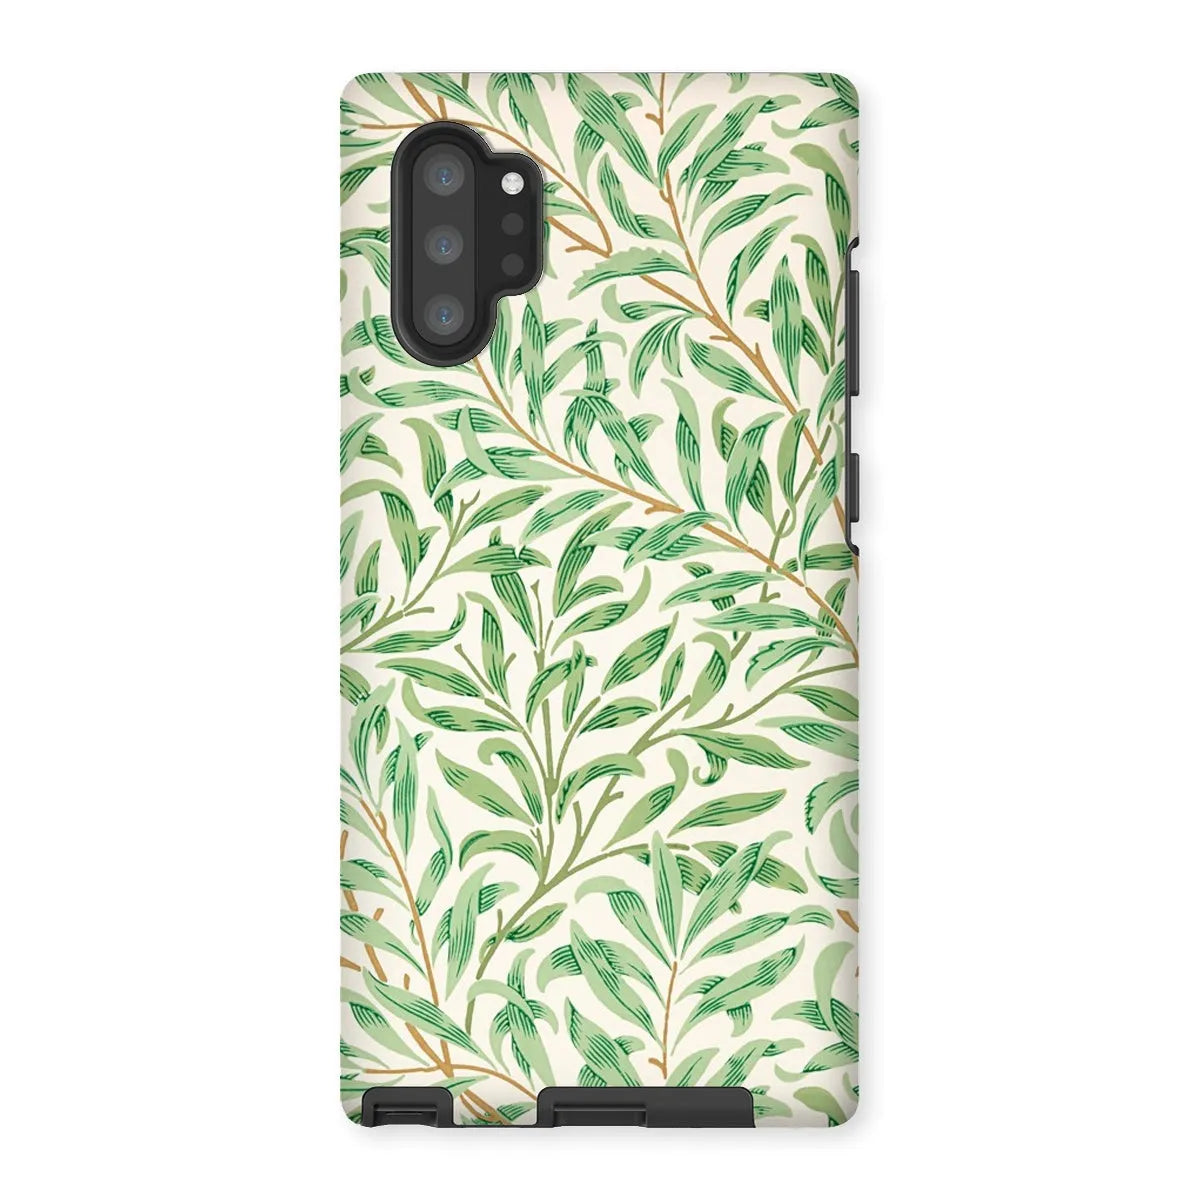 Willow Bough - Botanical Aesthetic Phone Case - William Morris - Samsung Galaxy Note 10p / Matte - Mobile Phone Cases